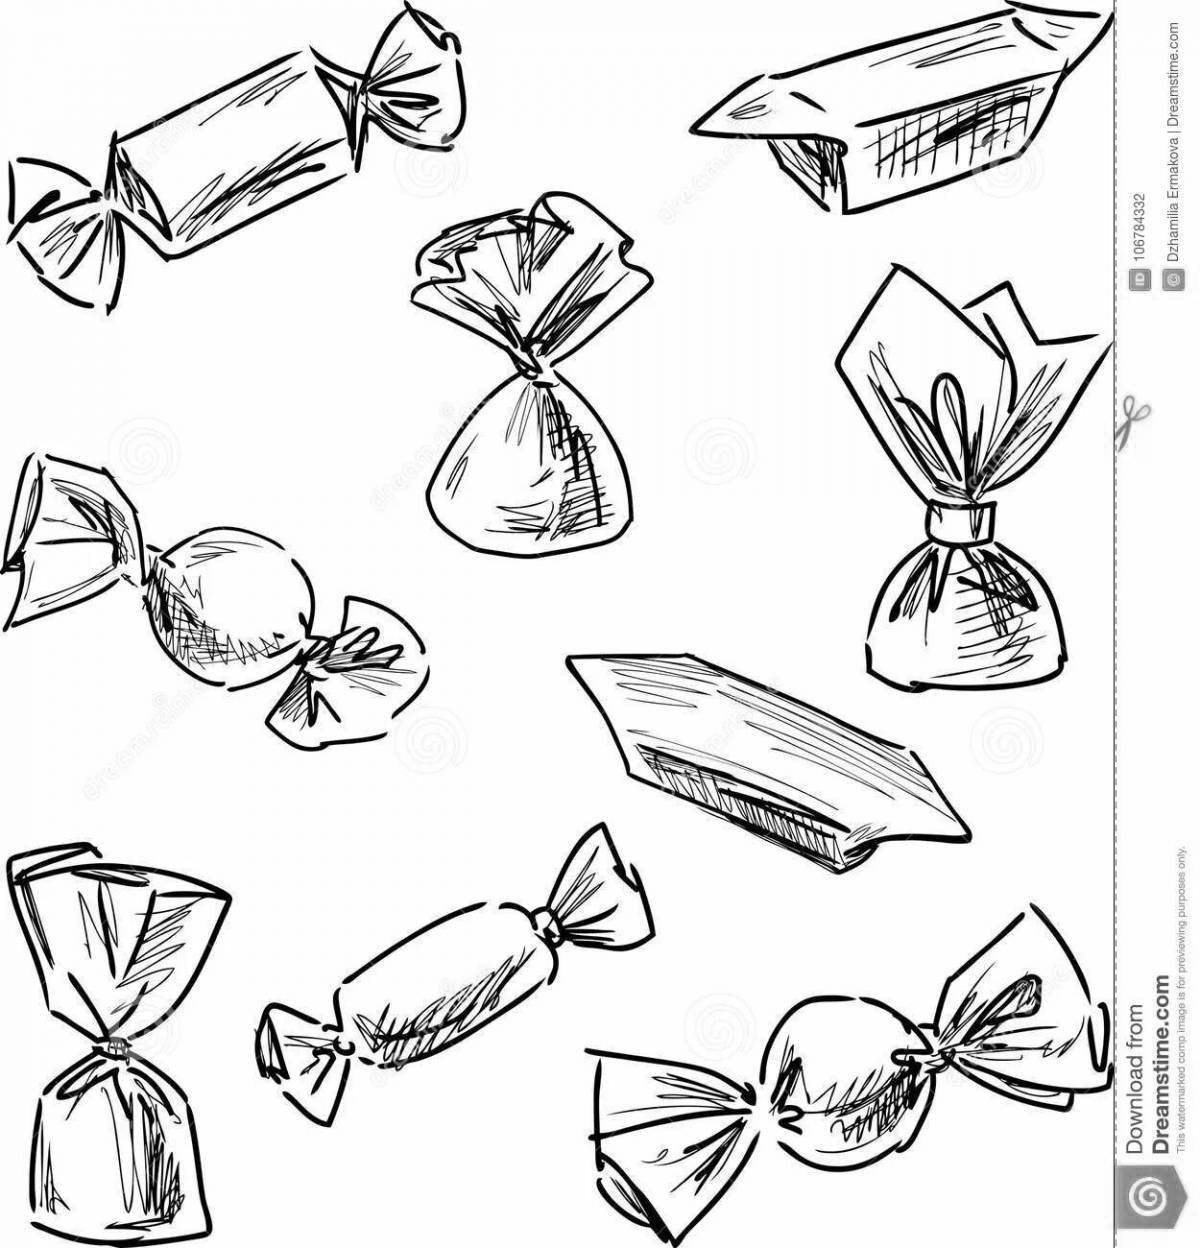 Fun candy wrapper coloring page